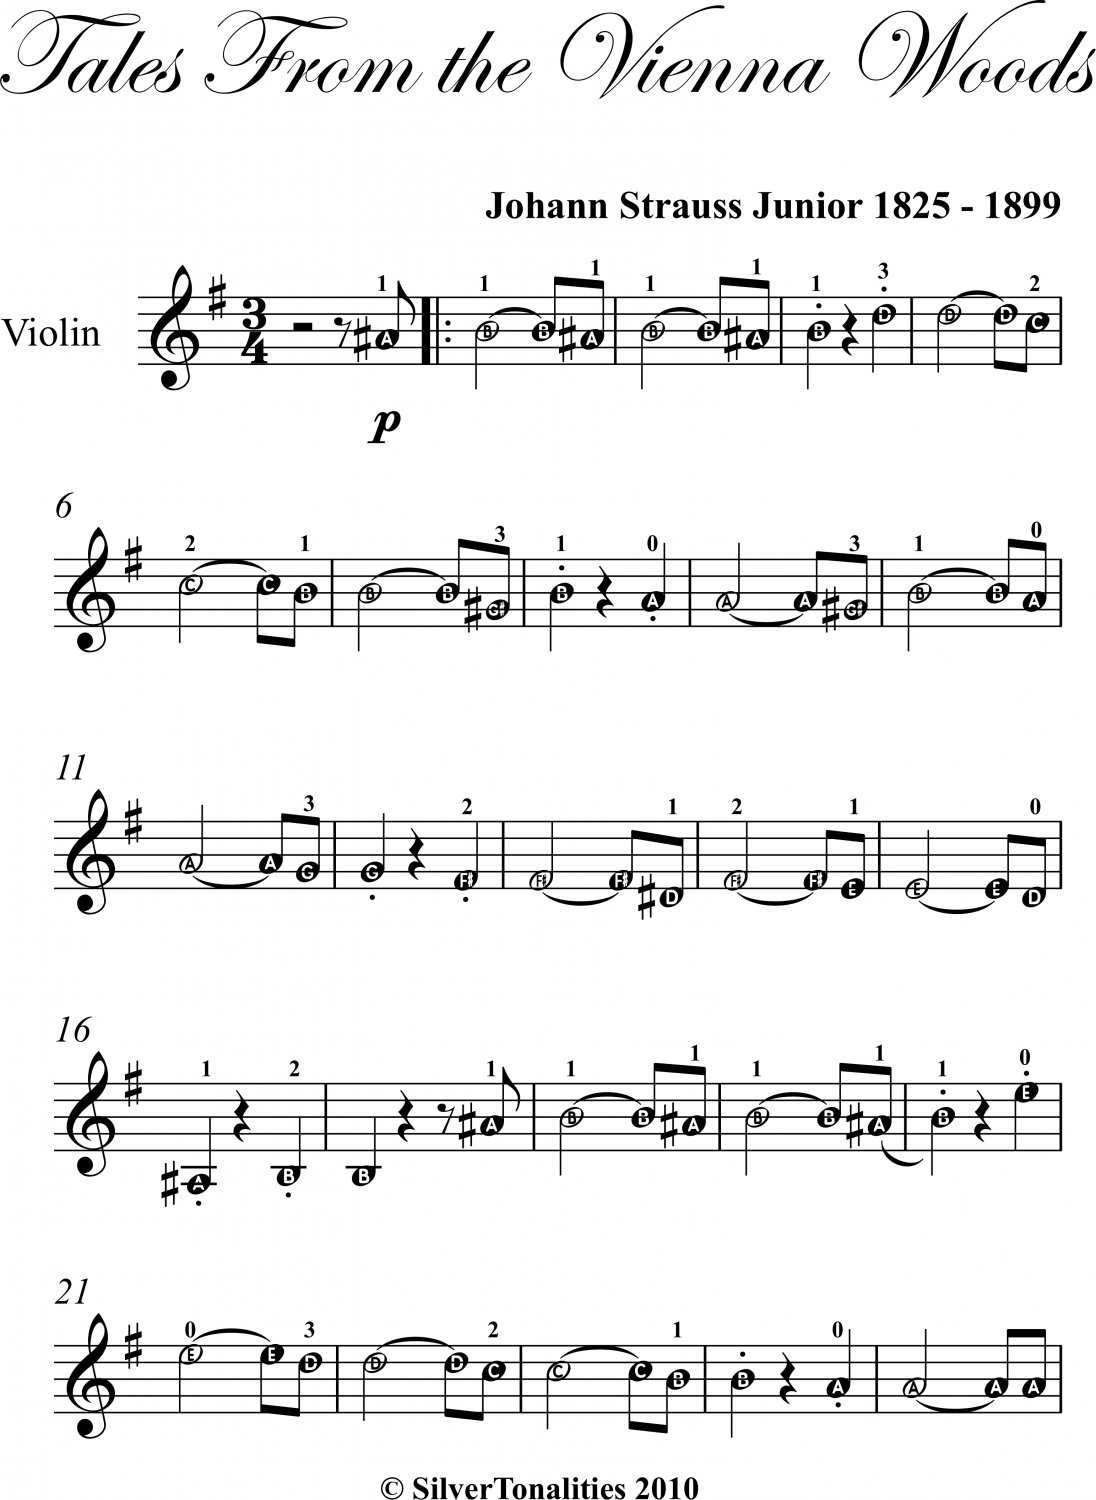 Tales from the Vienna Woods Easy Violin Sheet Music